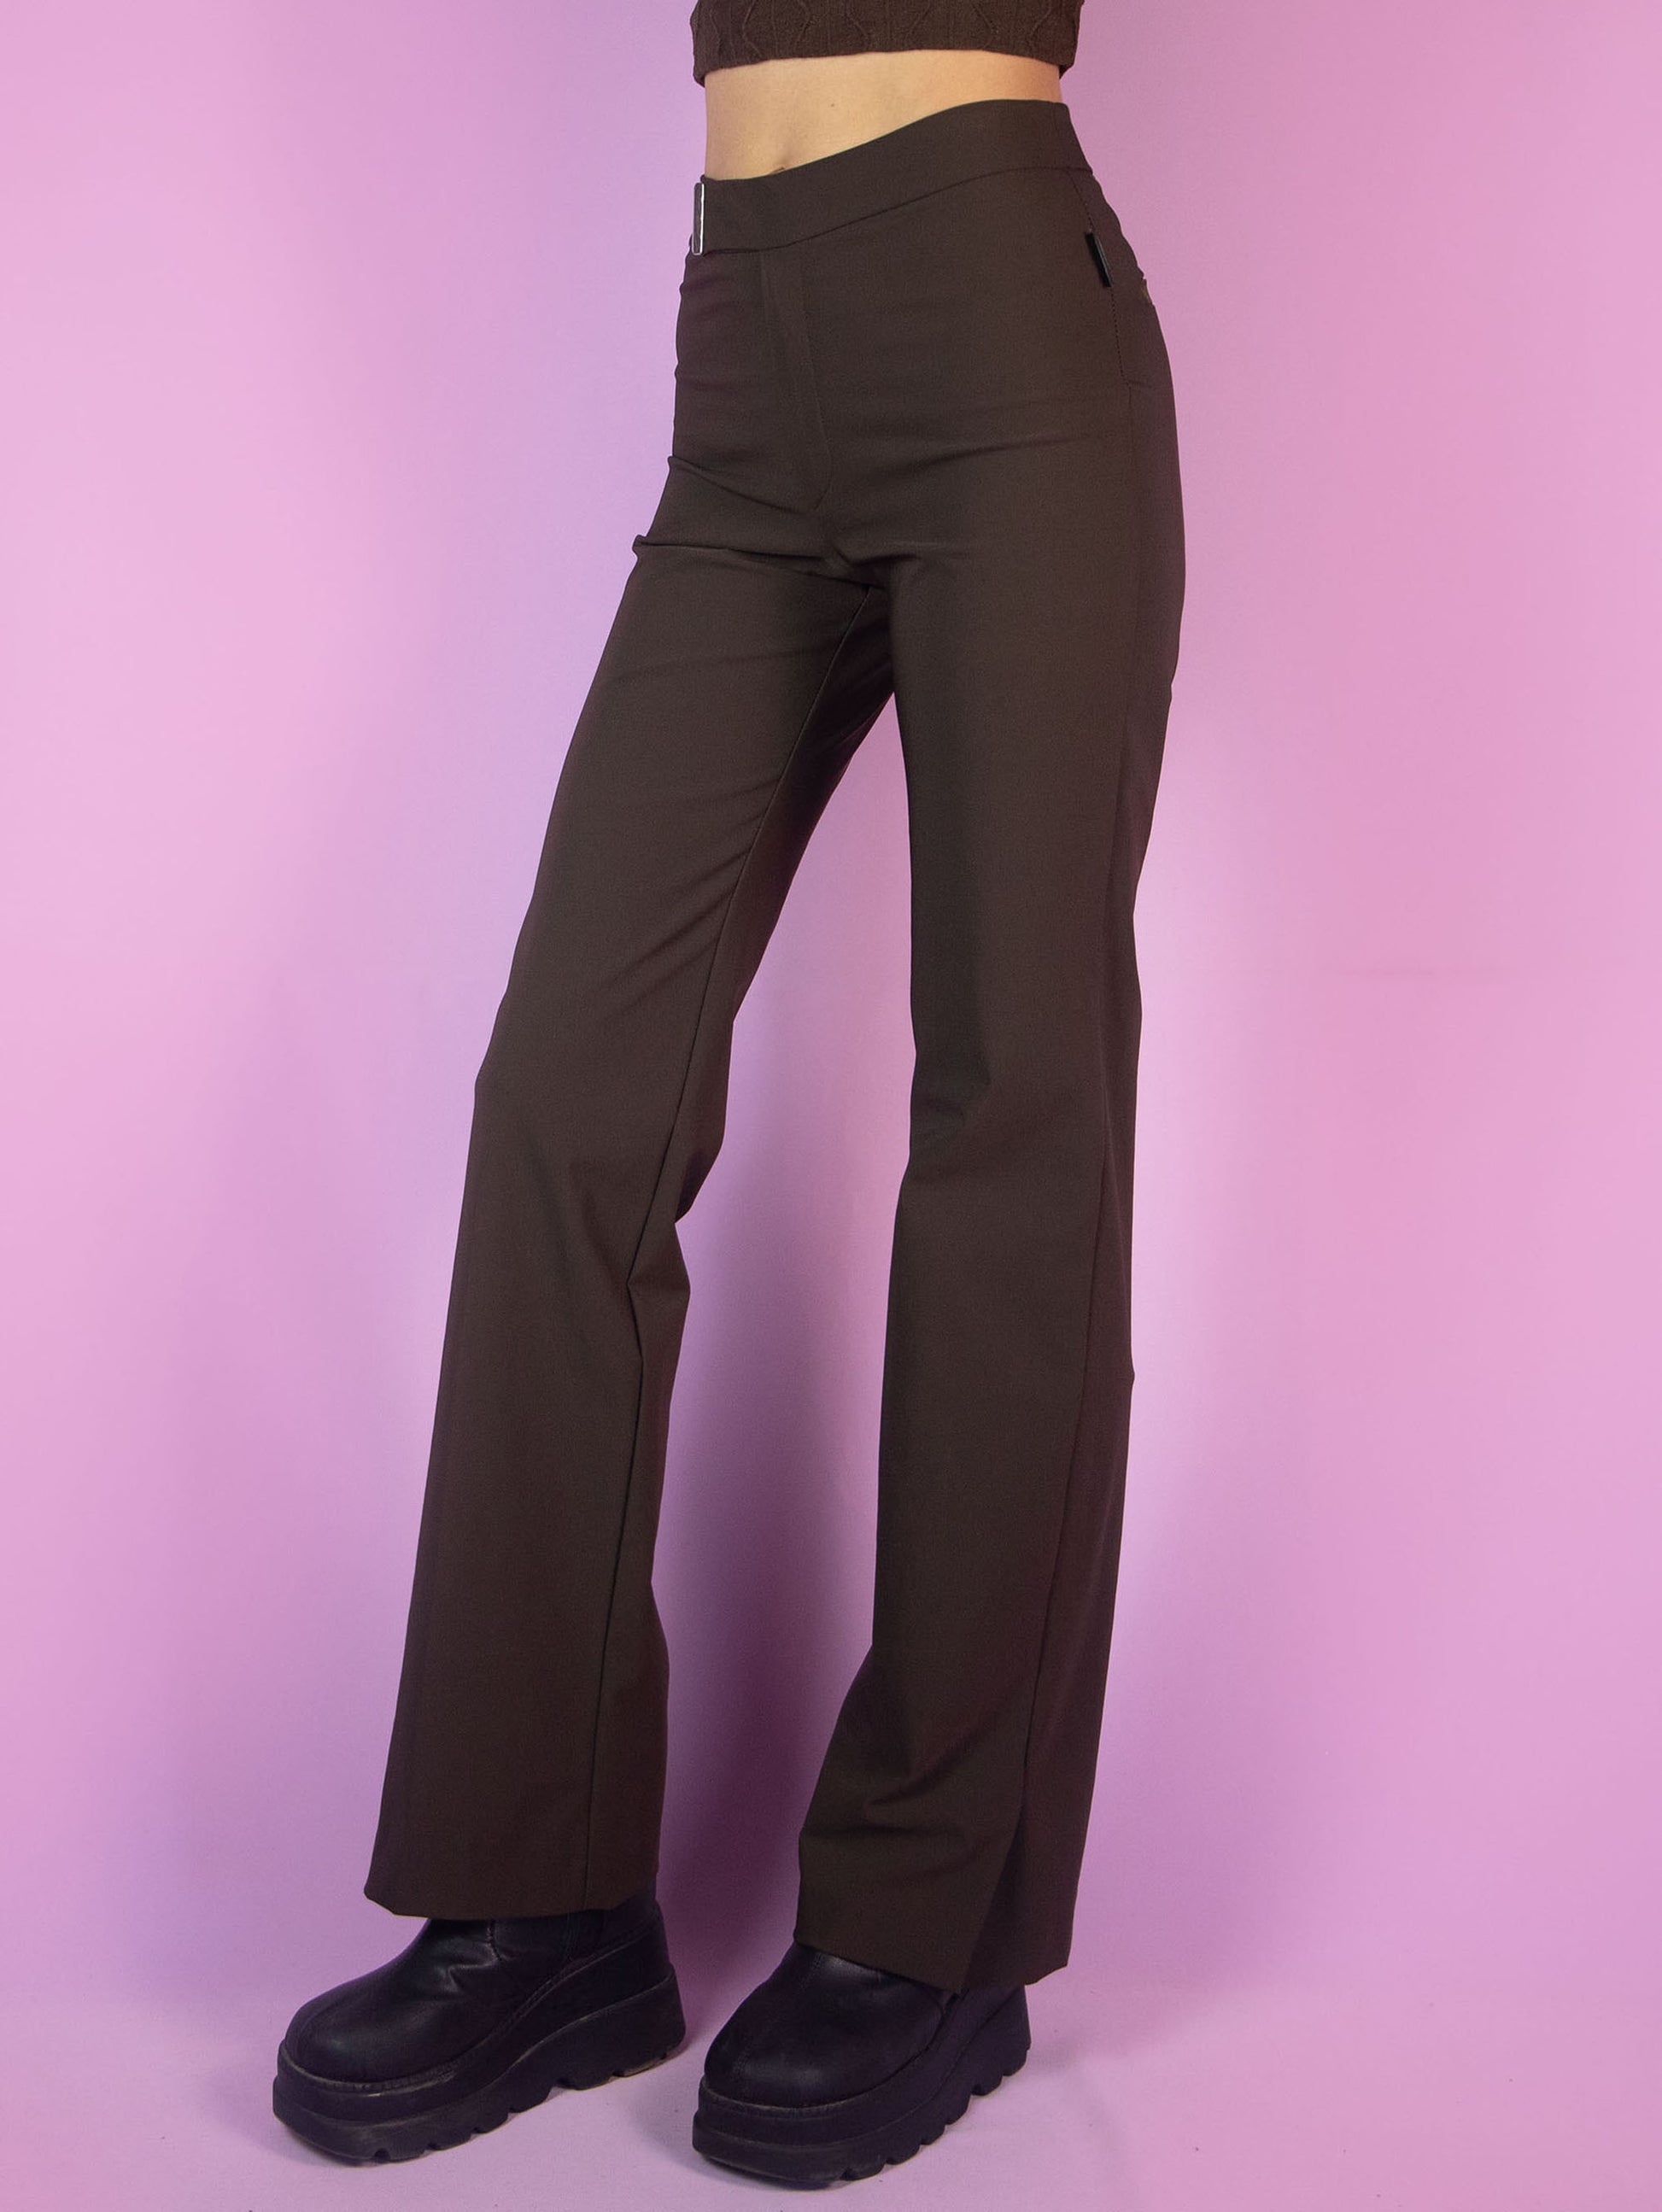 The Y2K Brown Wide Pants are vintage straight pants with elastic fabric, featuring a zipper closure and slits at the hem. Cyber grunge 2000s trousers.